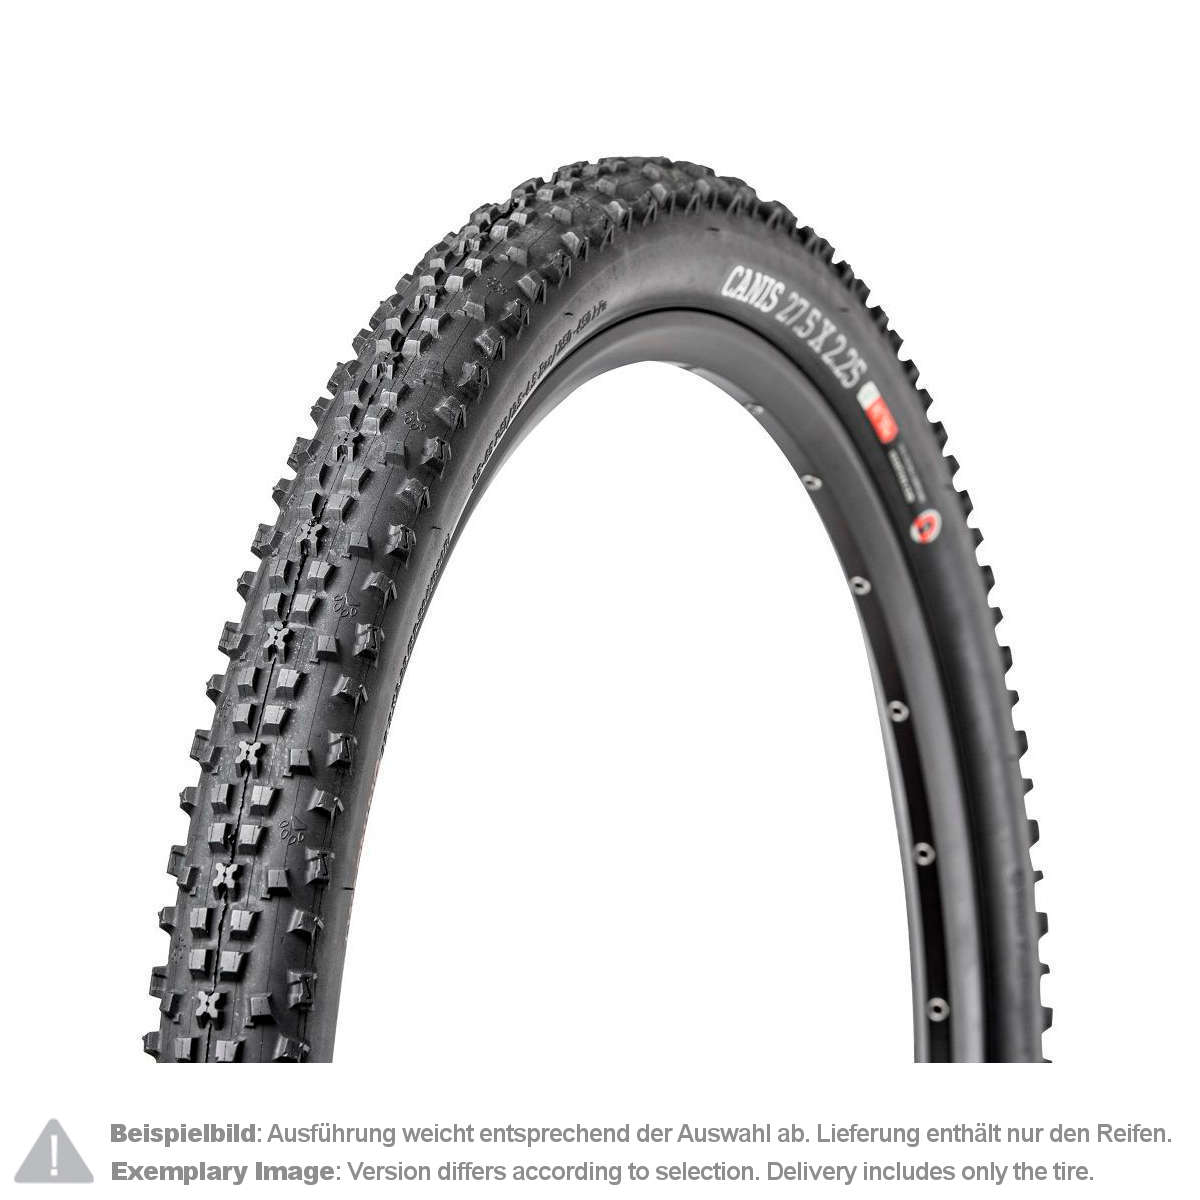 Onza MTB Tire Canis Black, 29 x 2.25 Inch, Tubeless Ready, 120 TPI, C3, 65a/55a, Foldable